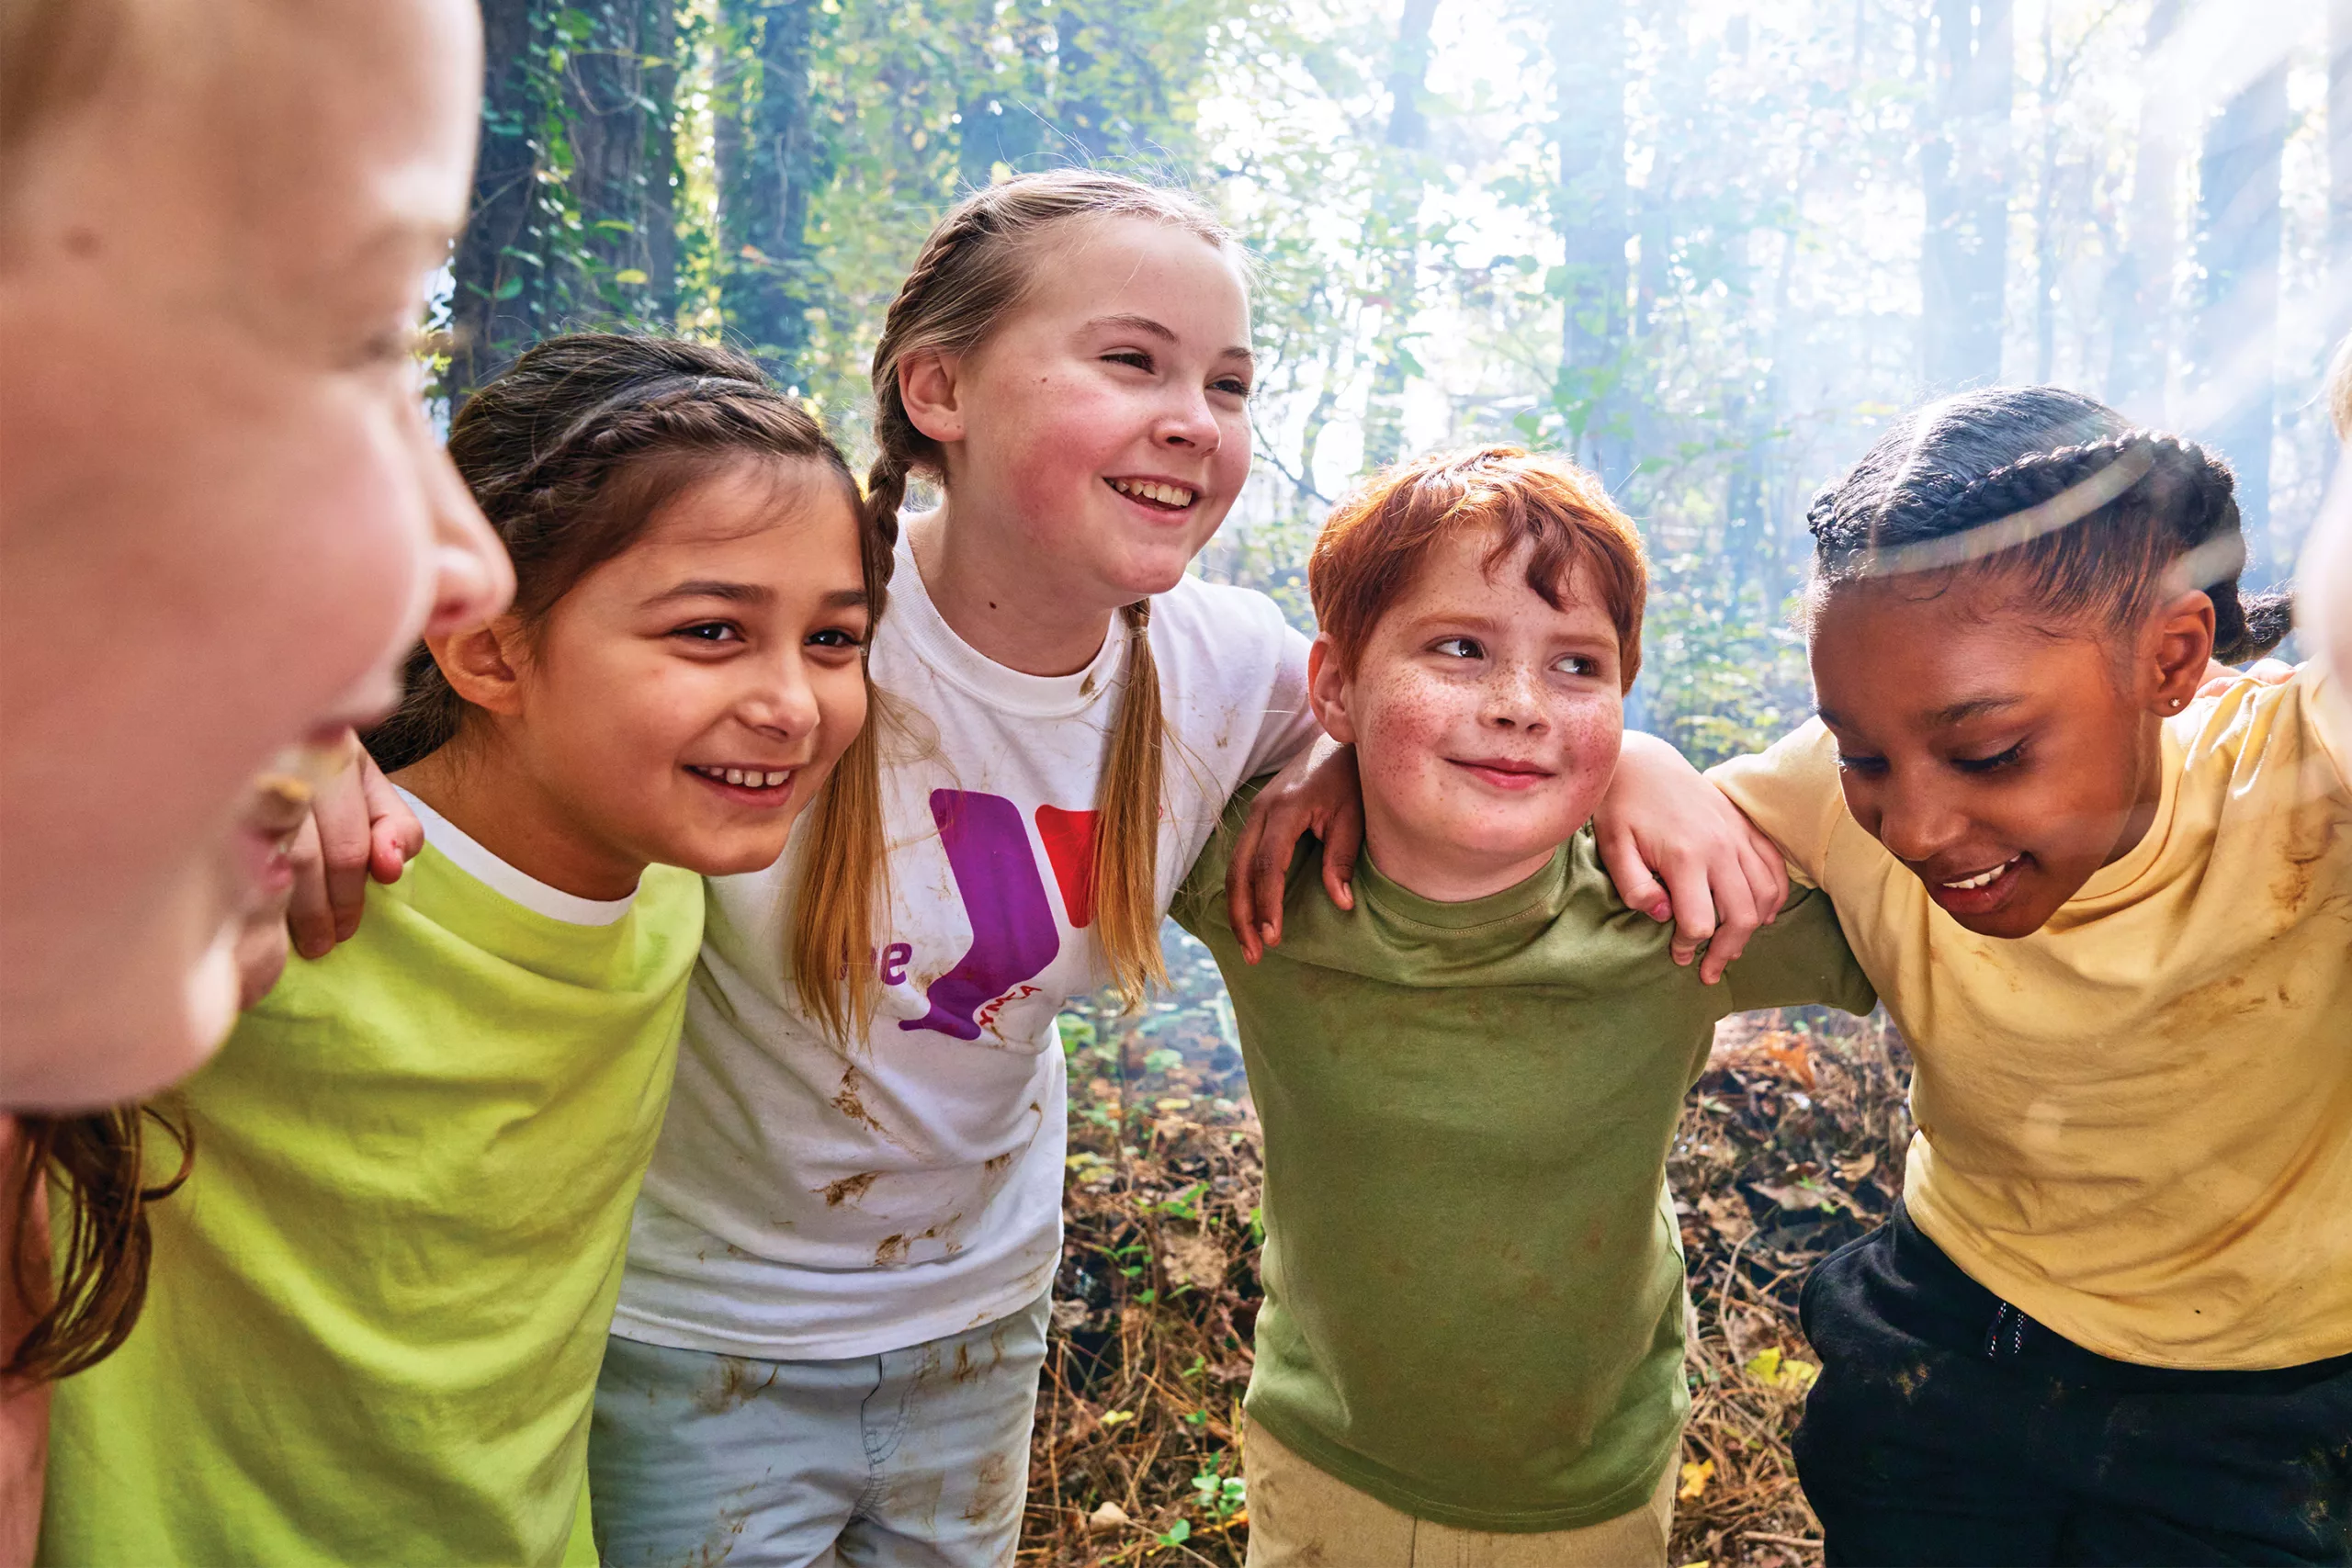 A group of children huddle together with their arms around one another. They are outdoors and smiling.